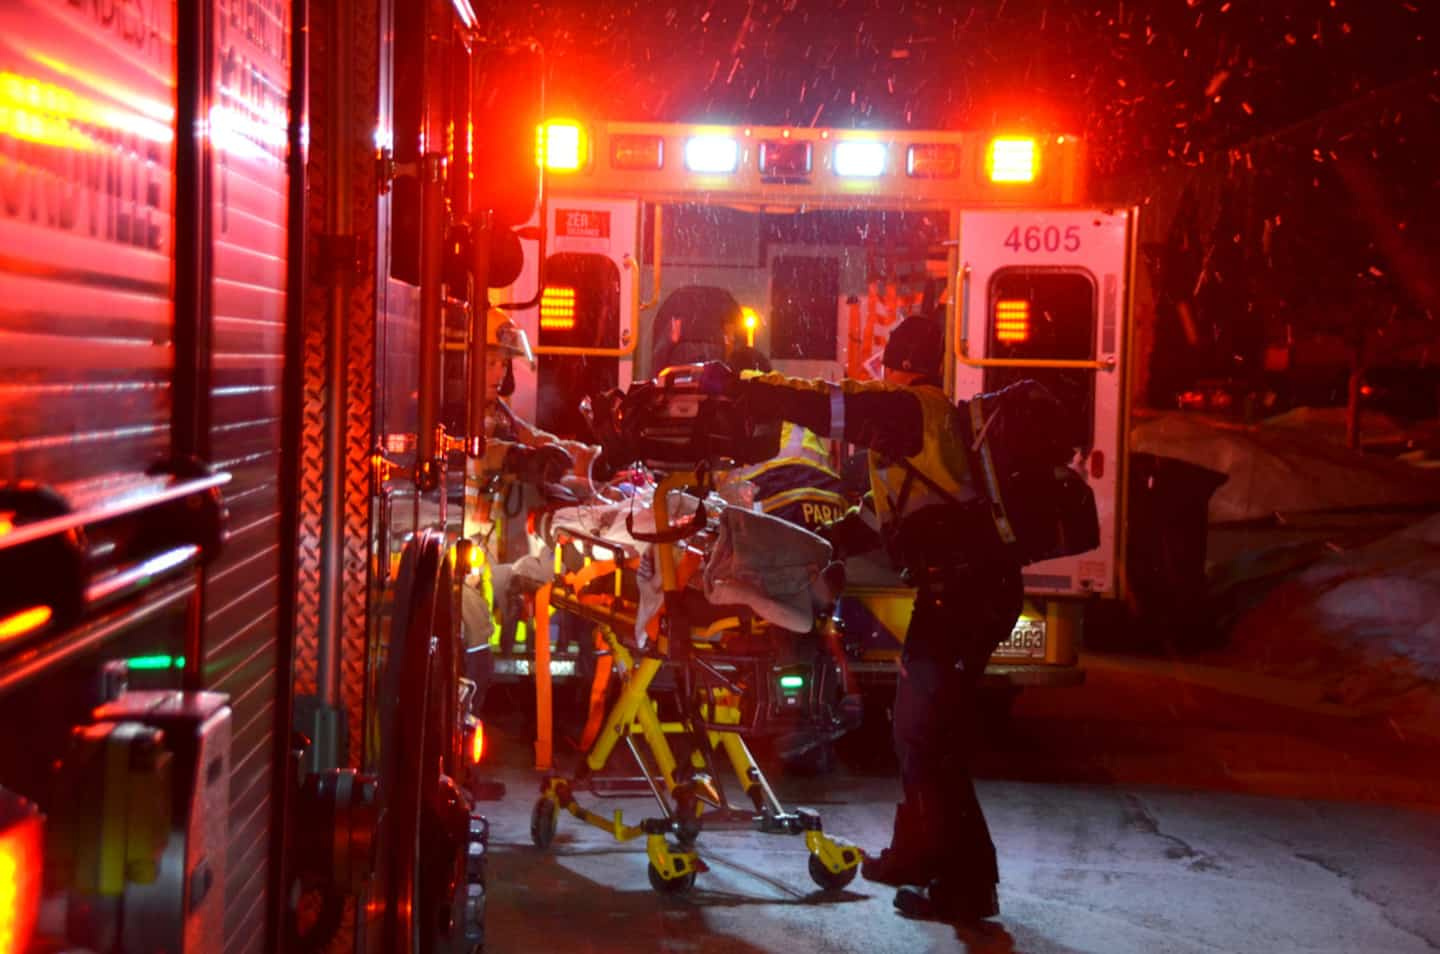 Drummondville: a person found unresponsive after a fire